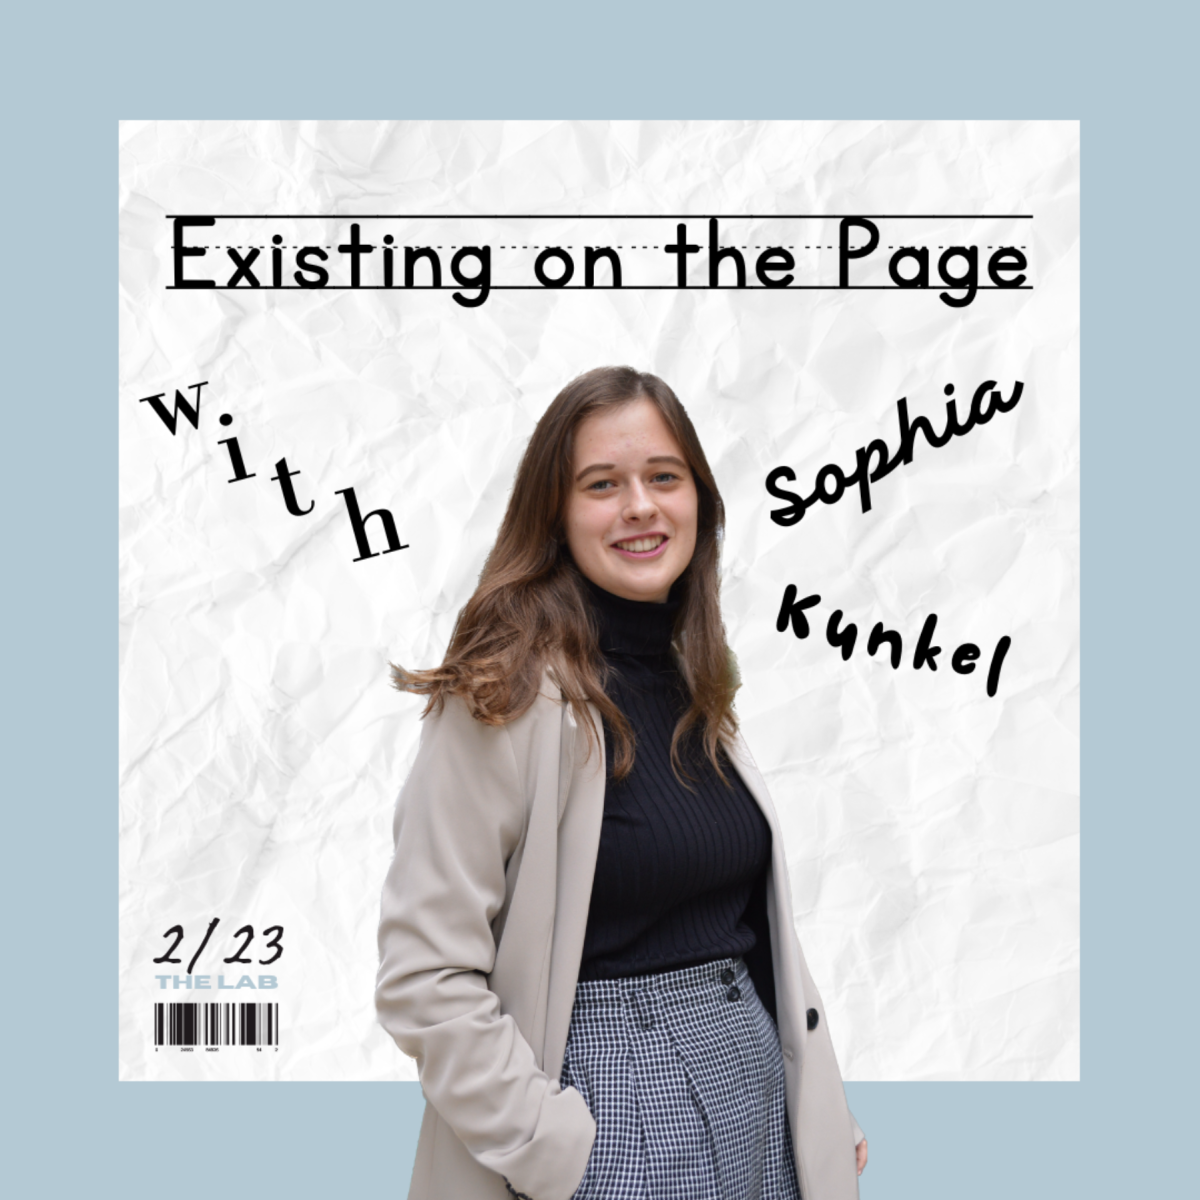 Existing on the Page with Sophia Kunkel